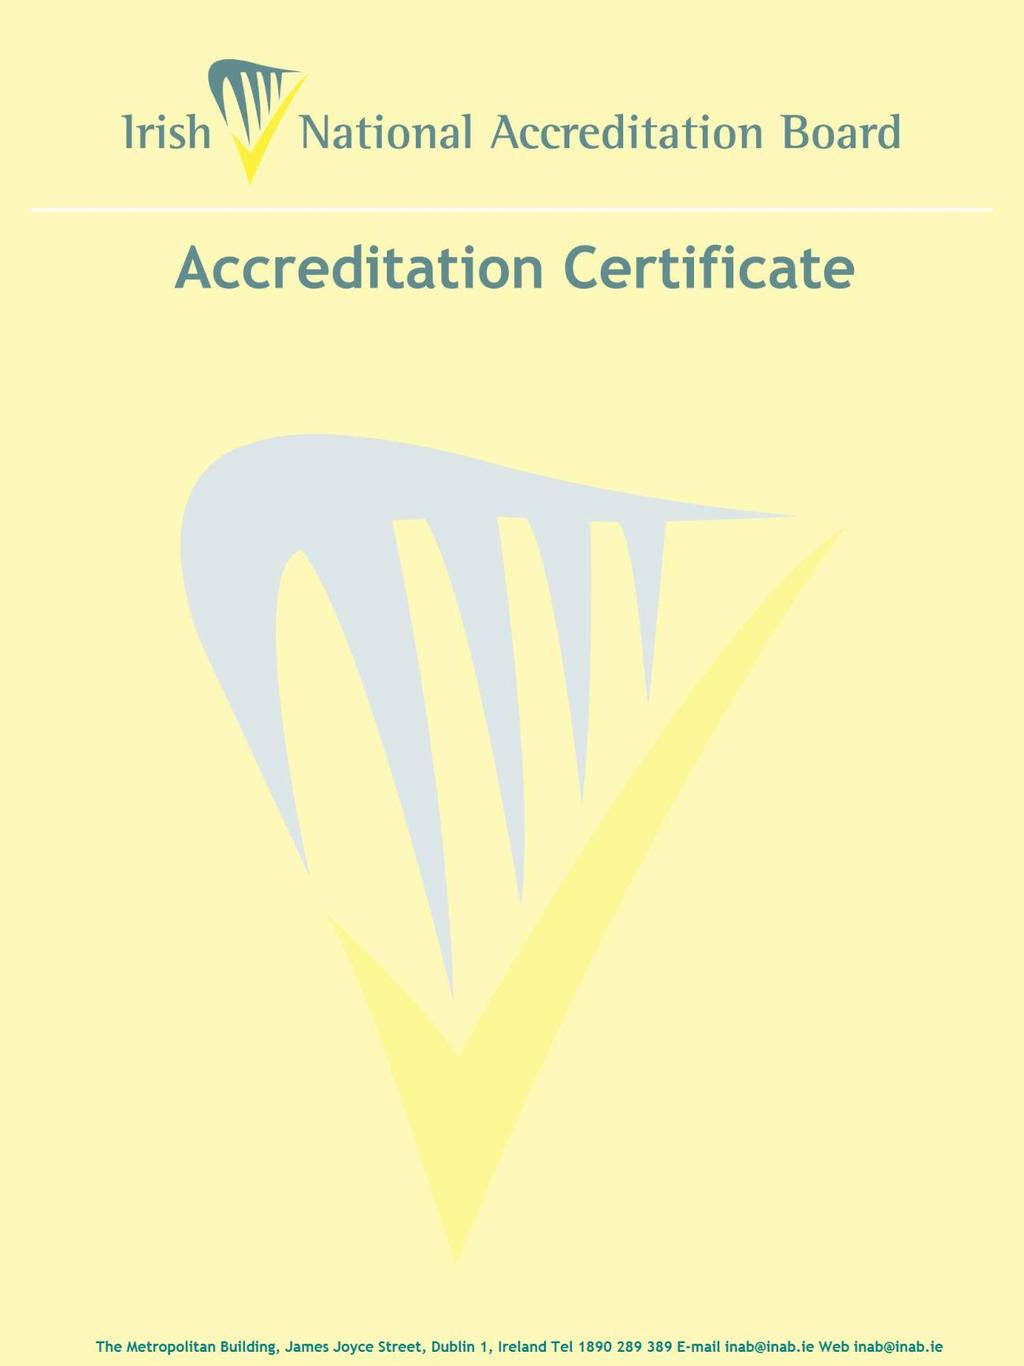 Lotus Automation (Ireland) Ltd Trading As LotusWorks Building 3, Finisklin Business Park, Sligo Calibration Laboratory Registration number: 277C is accredited by the Irish National Board (INAB) to